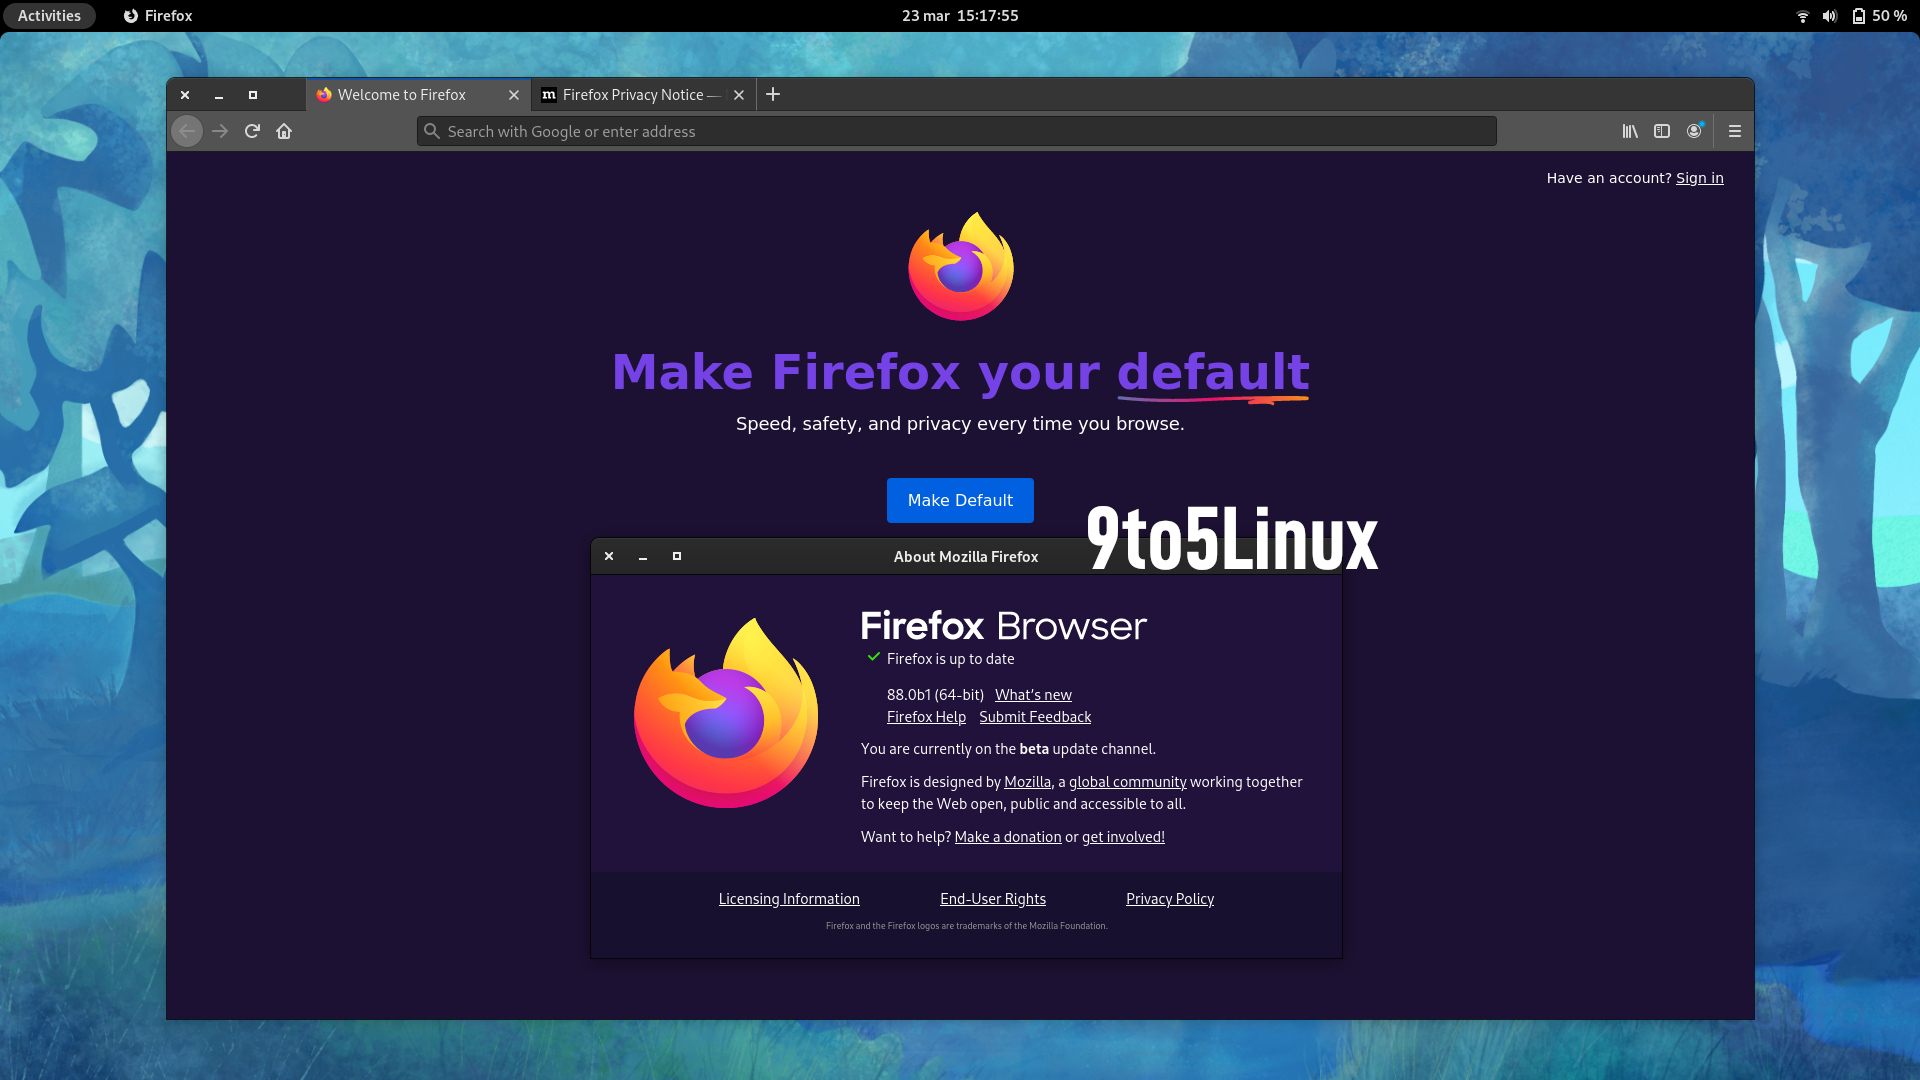 Firefox 88 Beta Adds Smooth Pinch-Zooming Support for Linux on Wayland, Enables AVIF by Default